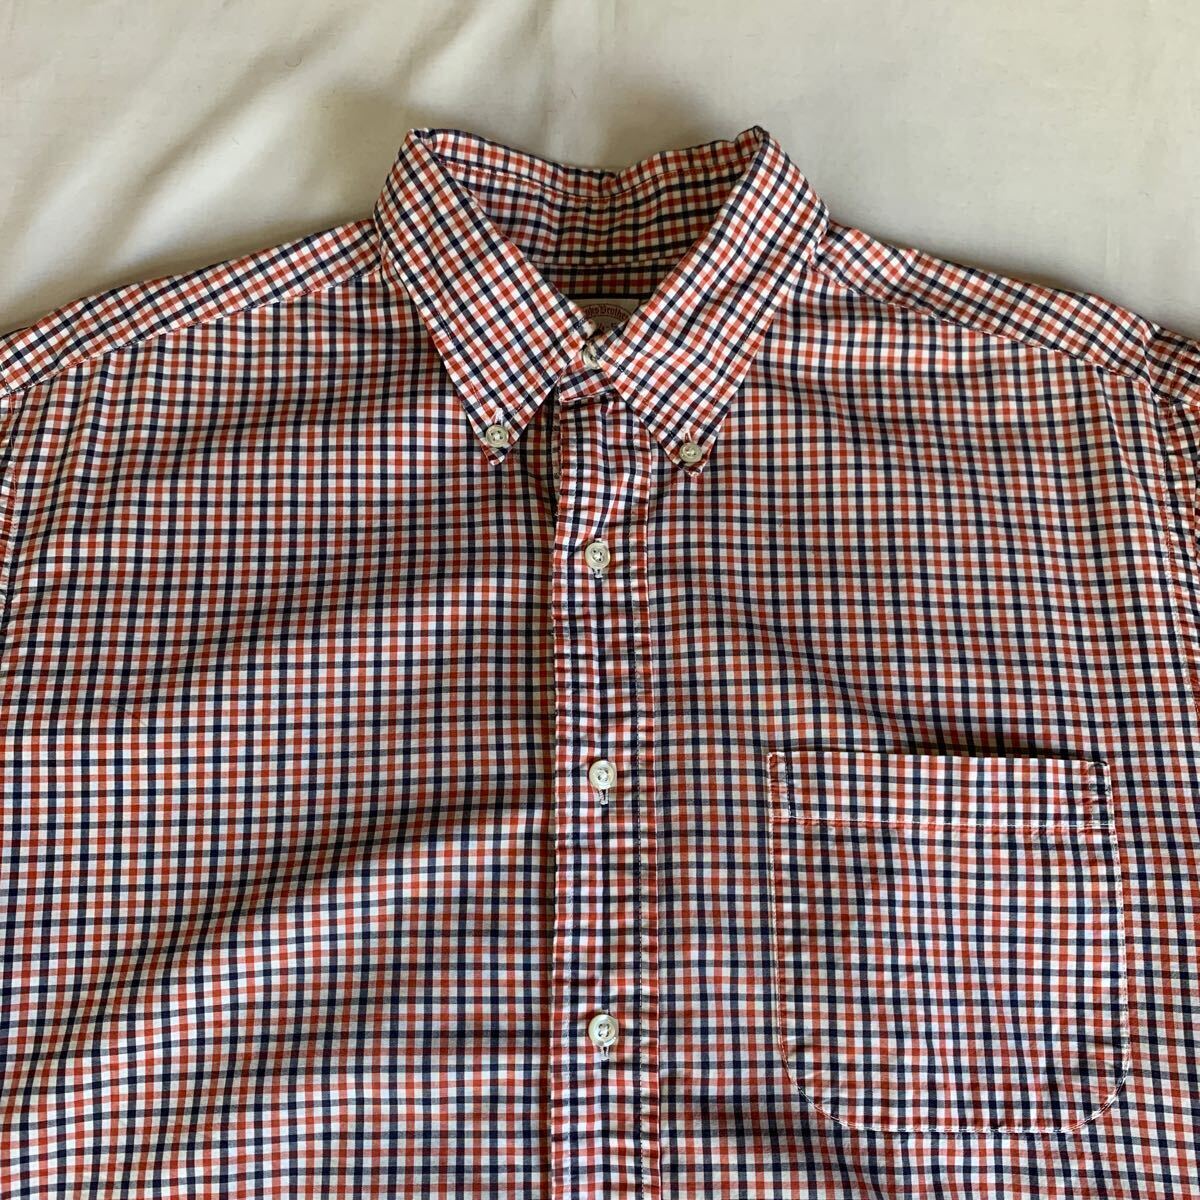 90s BROOKS BROTHERS PLAID B.D.SHIRT Makers MADE IN USA ブルックスブラザーズ チェックシャツ ボタンダウンシャツ アメリカ製 80s_画像5